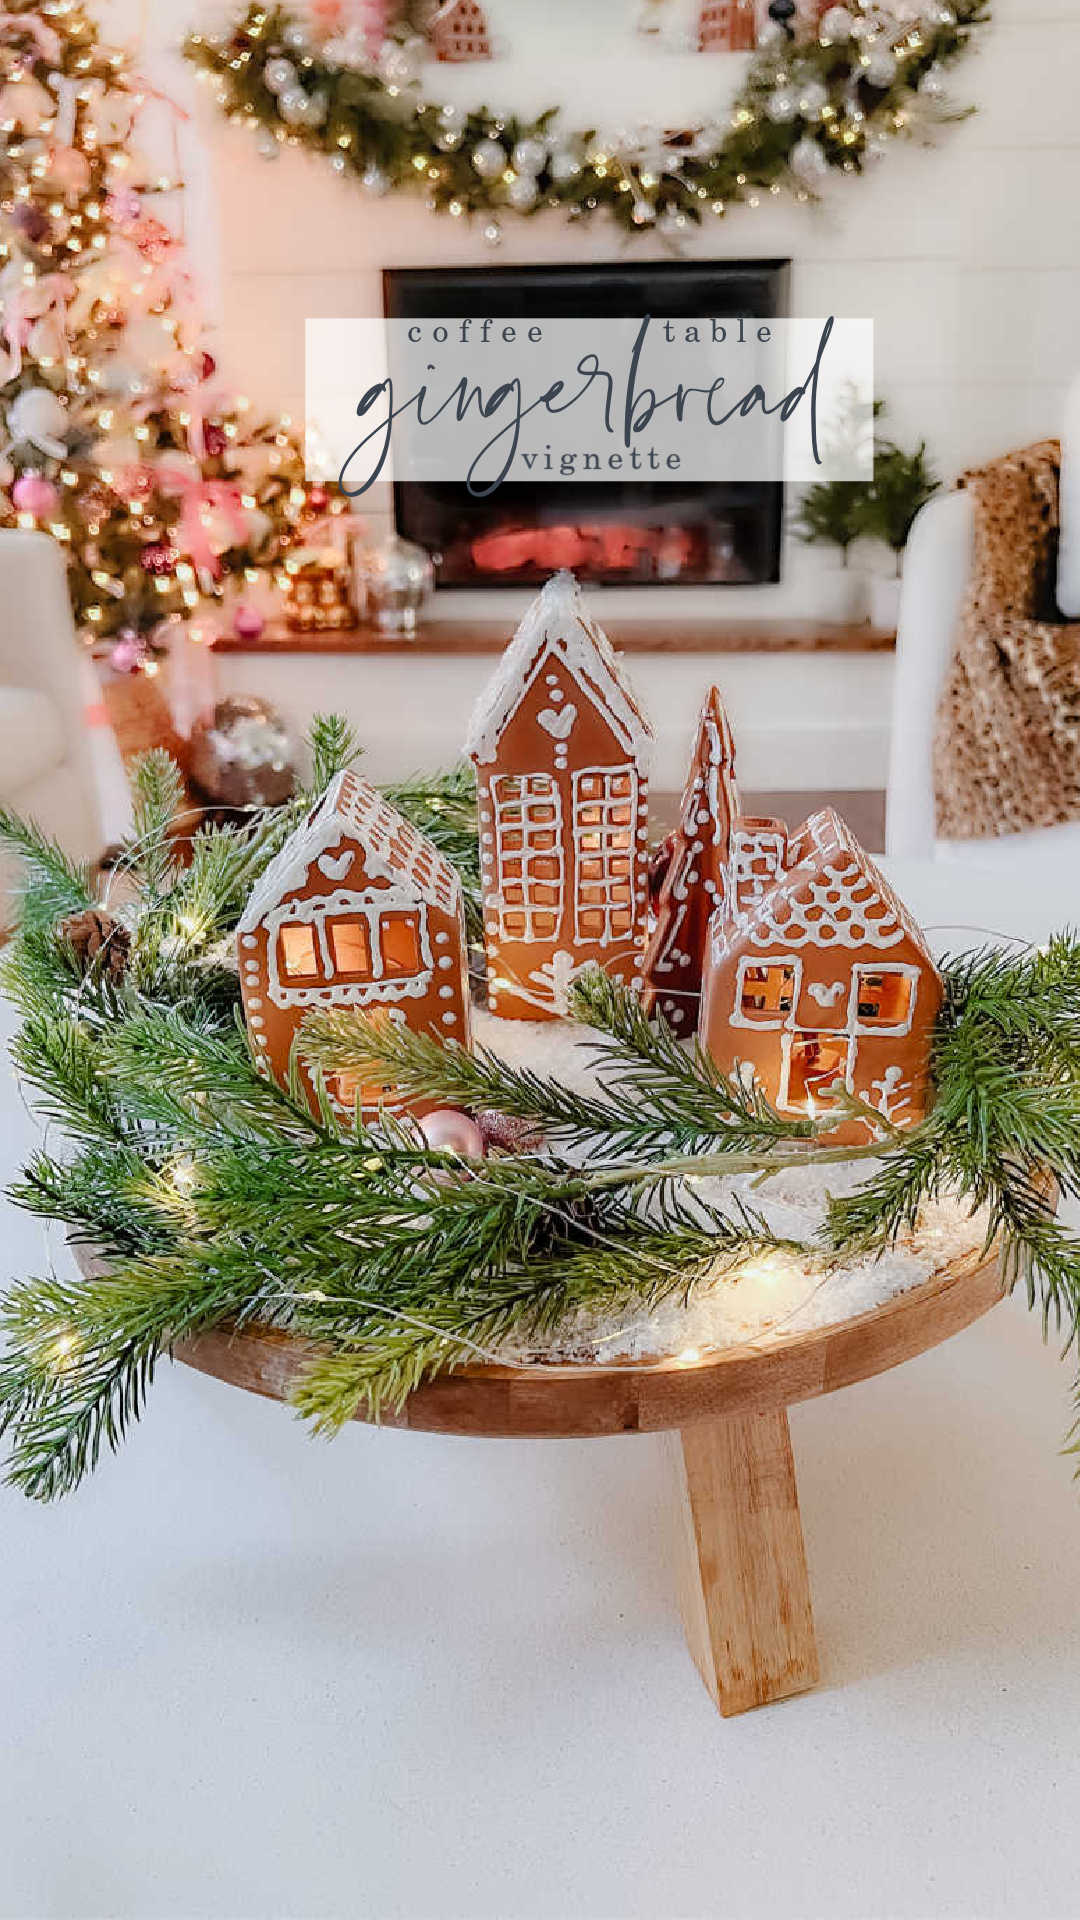 Christmas Painted Gingerbread House Vignette. Explore the magic of Christmas with a  Christmas Painted Gingerbread House Vignette, where plain white farmhouse houses are transformed into charming gingerbread creating a cozy feeling for the holiday season.